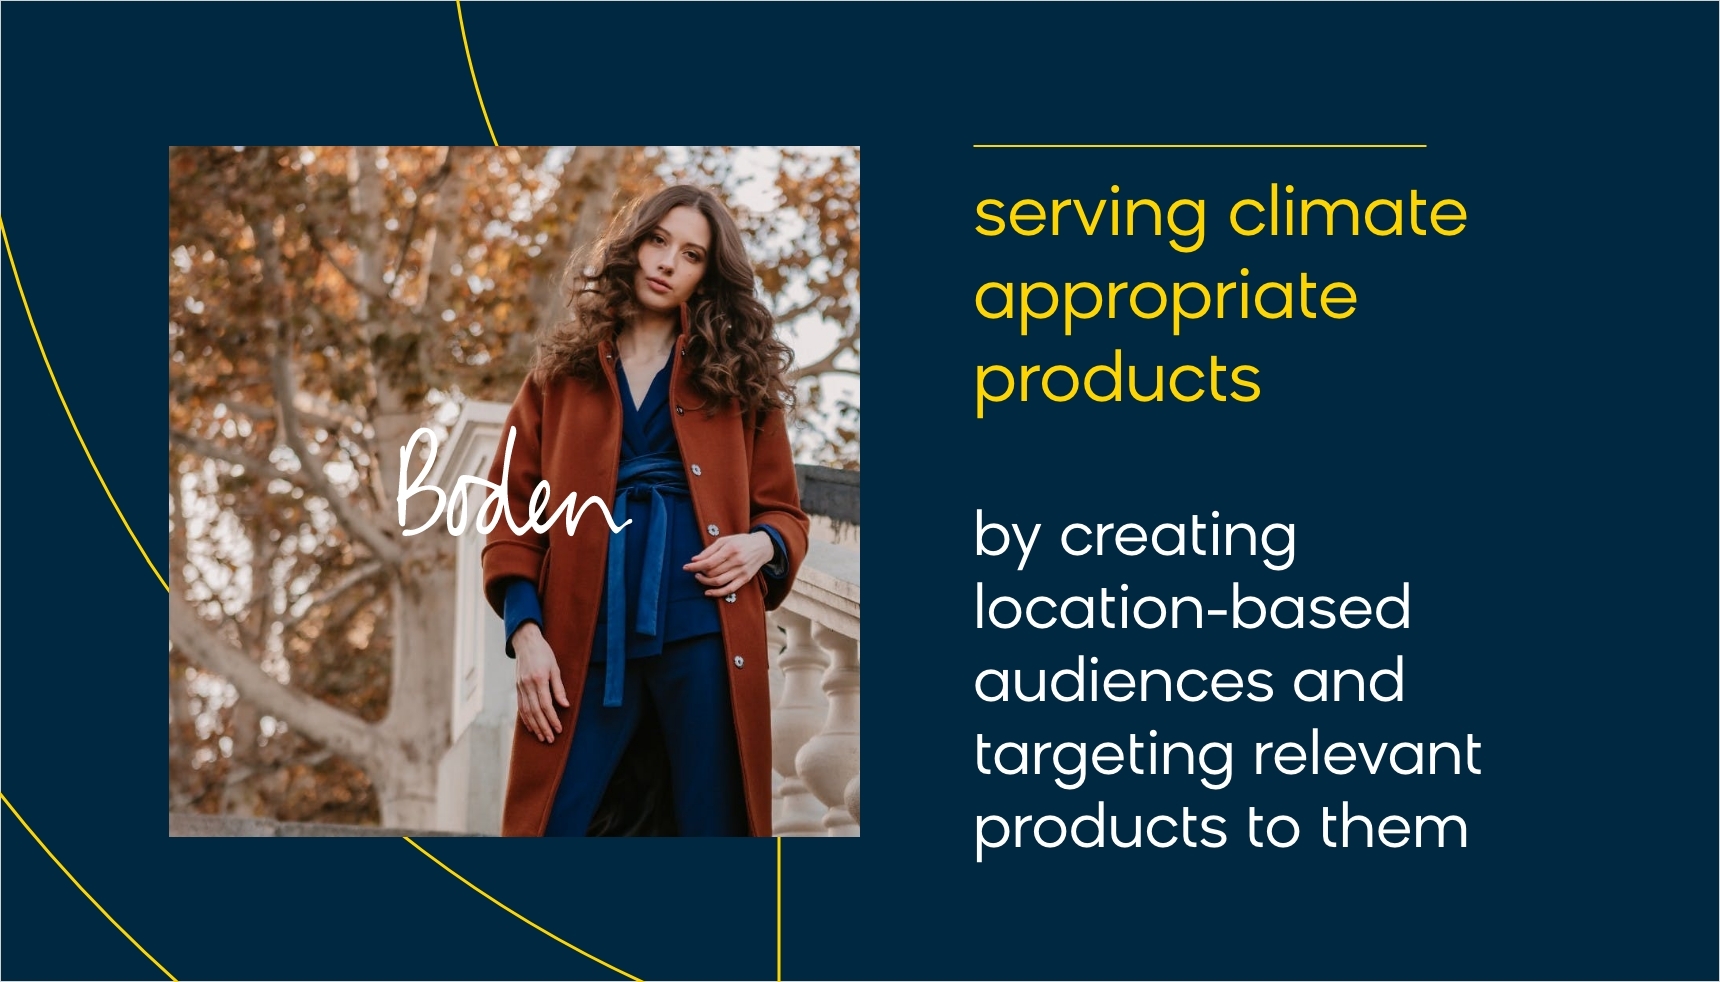 British clothing retailer Boden saw that personalizing the customer journey would be the key to its future success